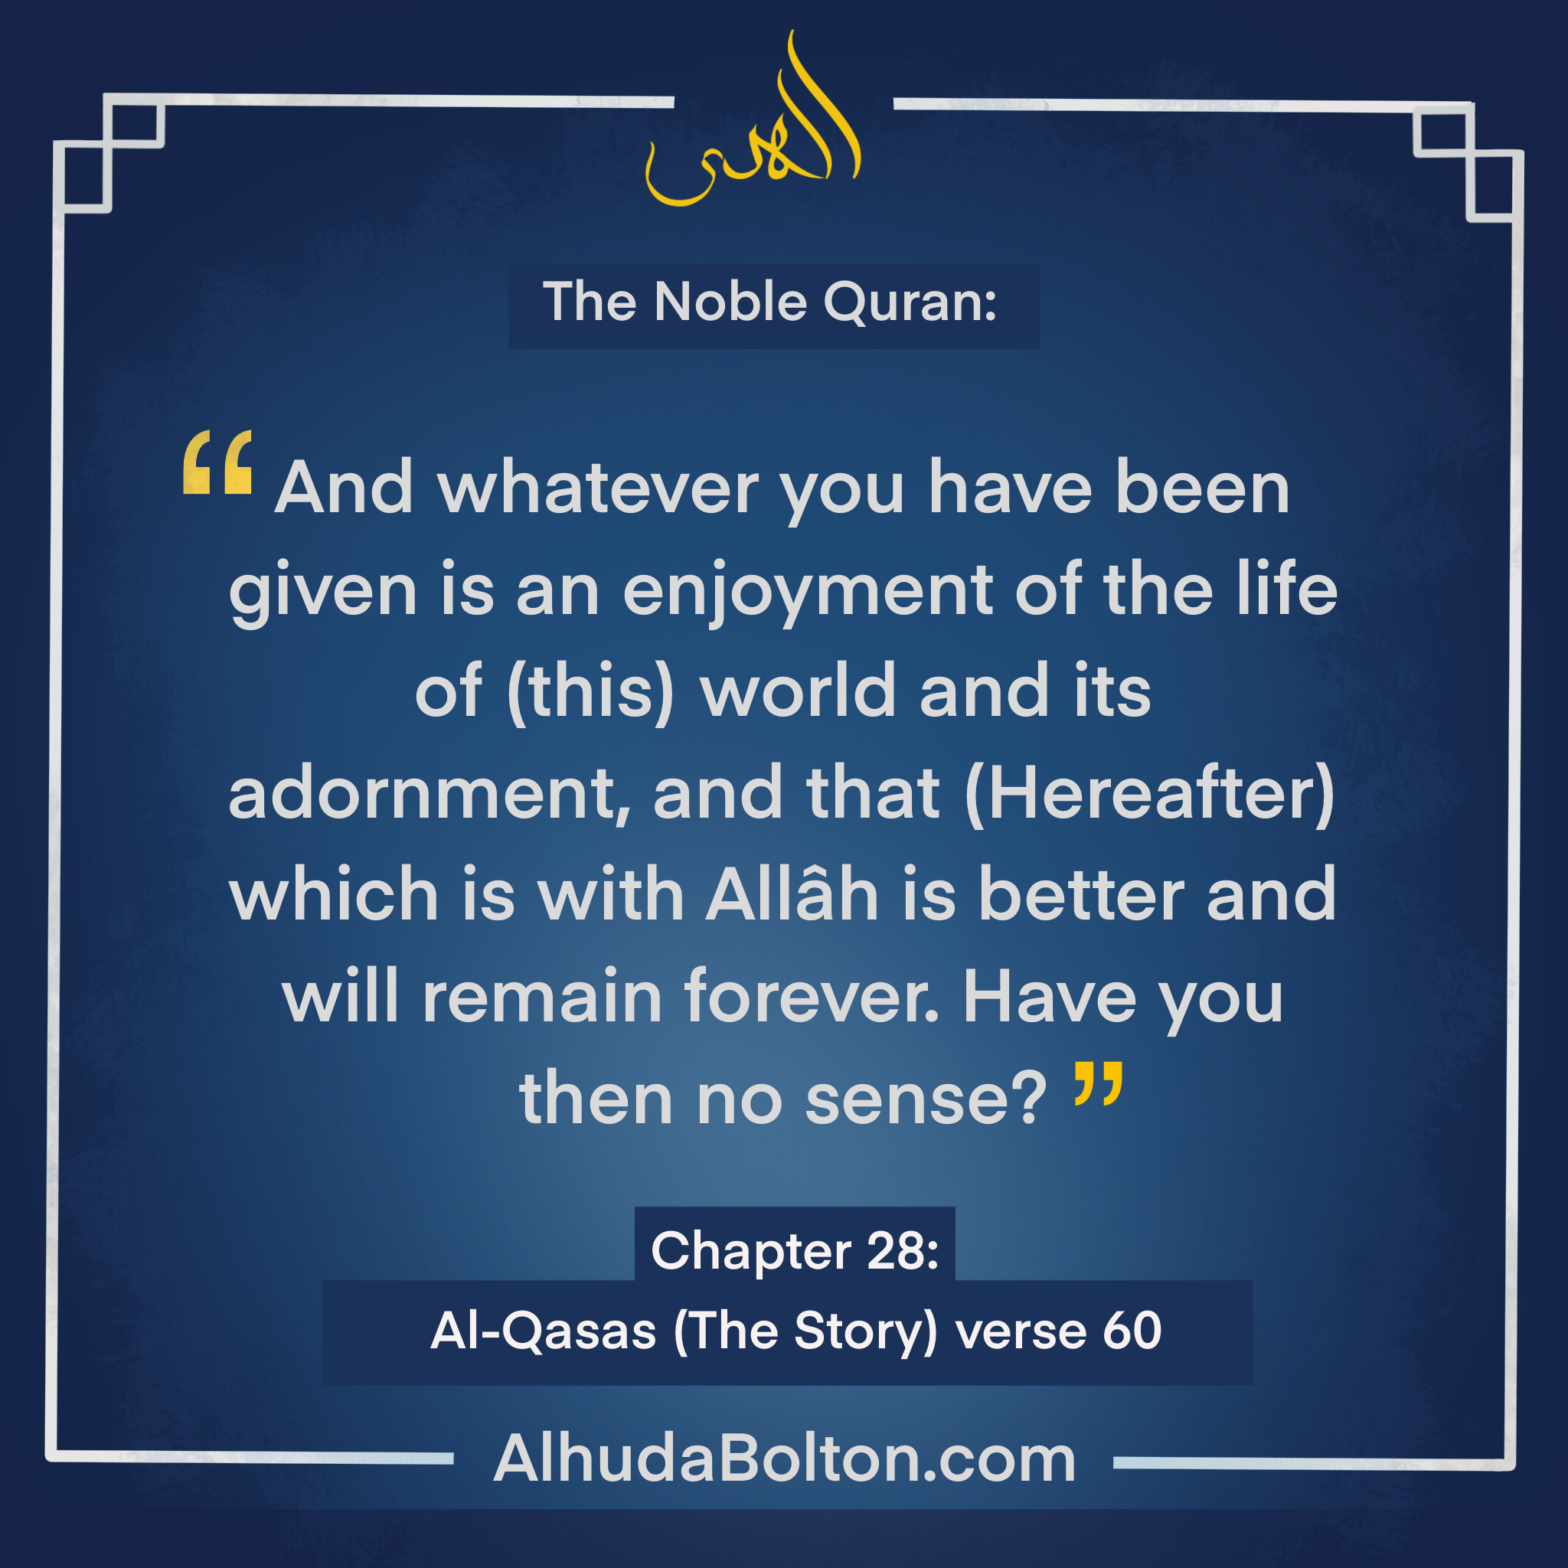 Quran: Whatever you have been given…